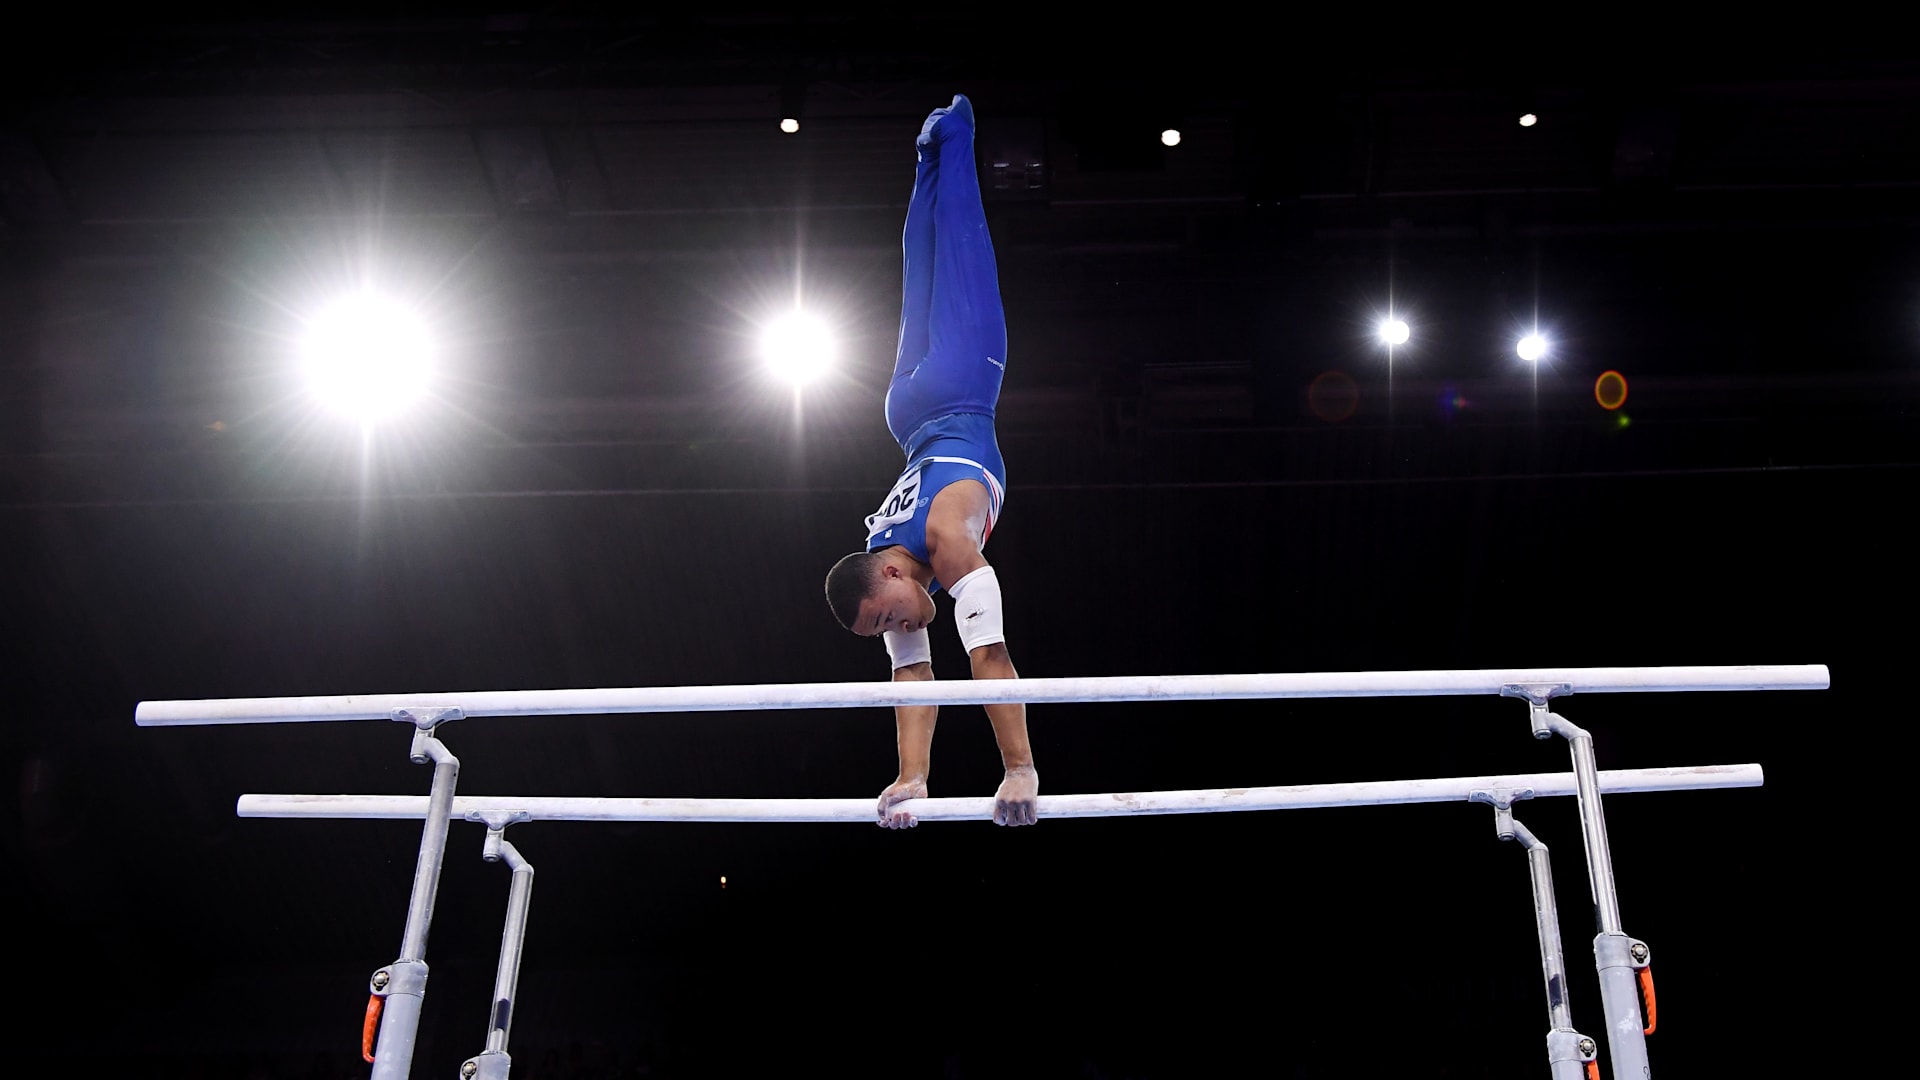 A bluffer's guide to artistic gymnastics: Parallel bars